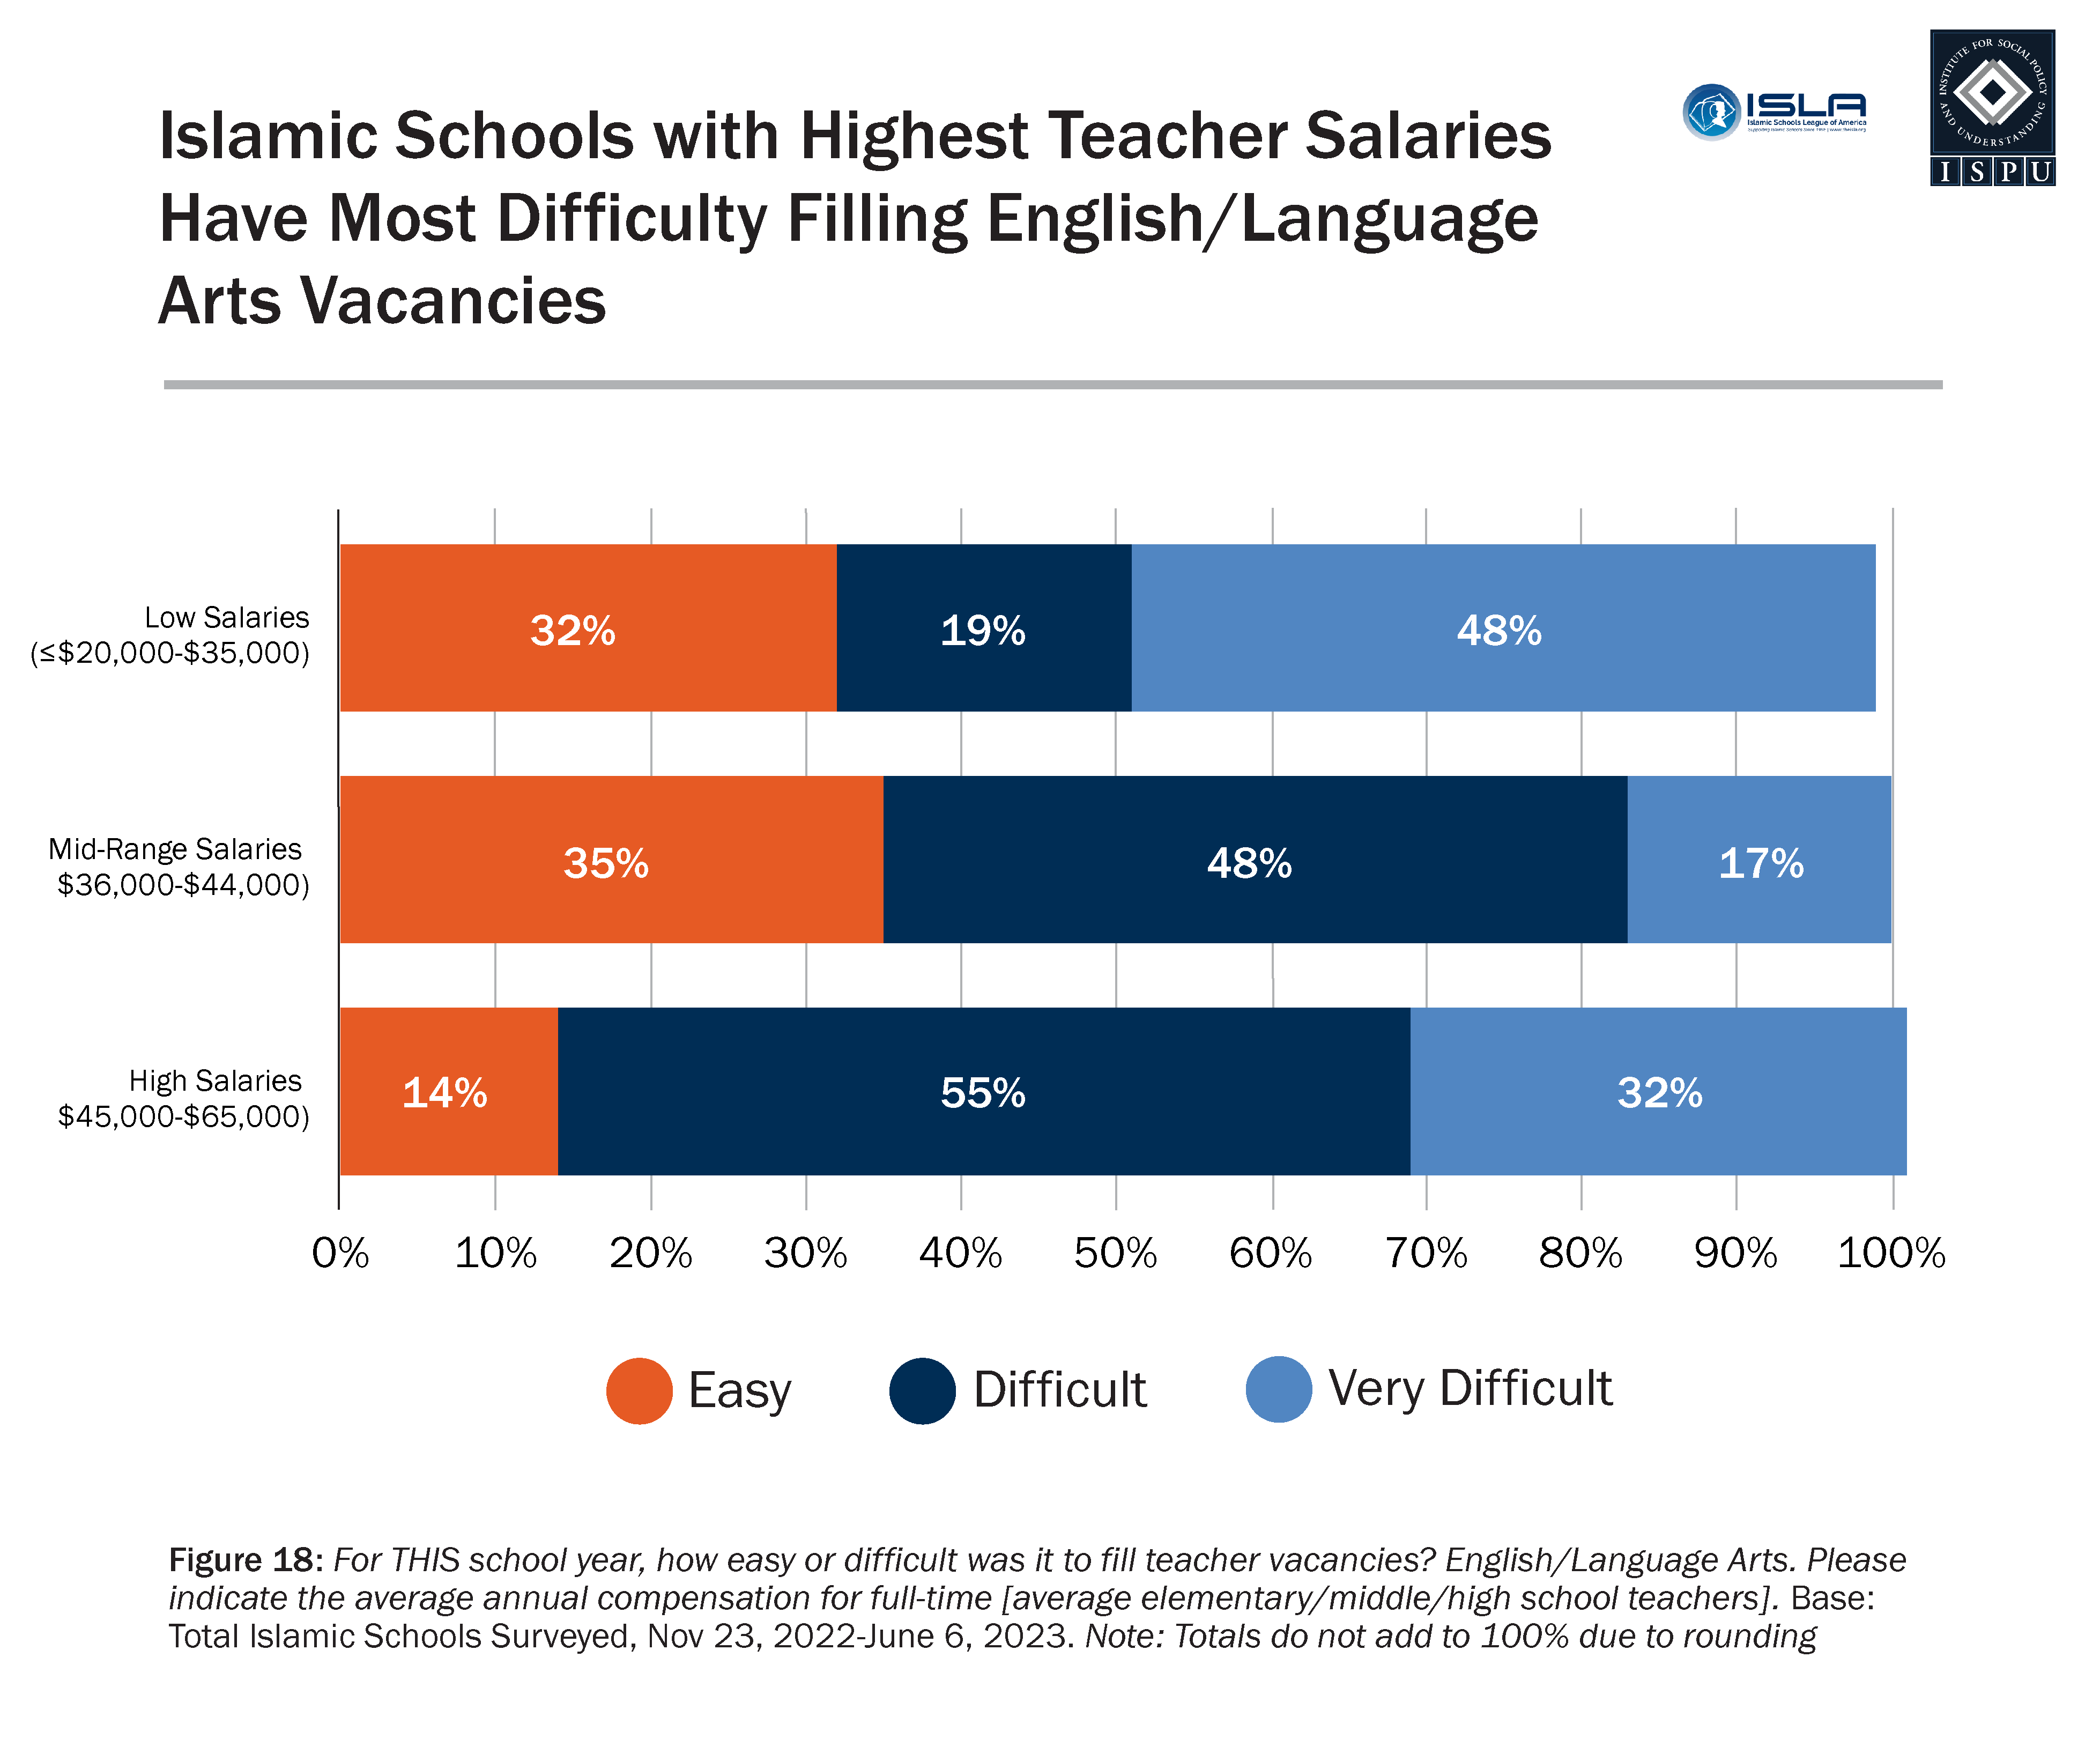 A horizontal stacked bar chart showing the percentage of schools filling English/Language Arts teacher vacancies at each level of ease/difficulty (Easy, Difficult, Very Difficult) by the level of teacher pay (low, mid-range, high).